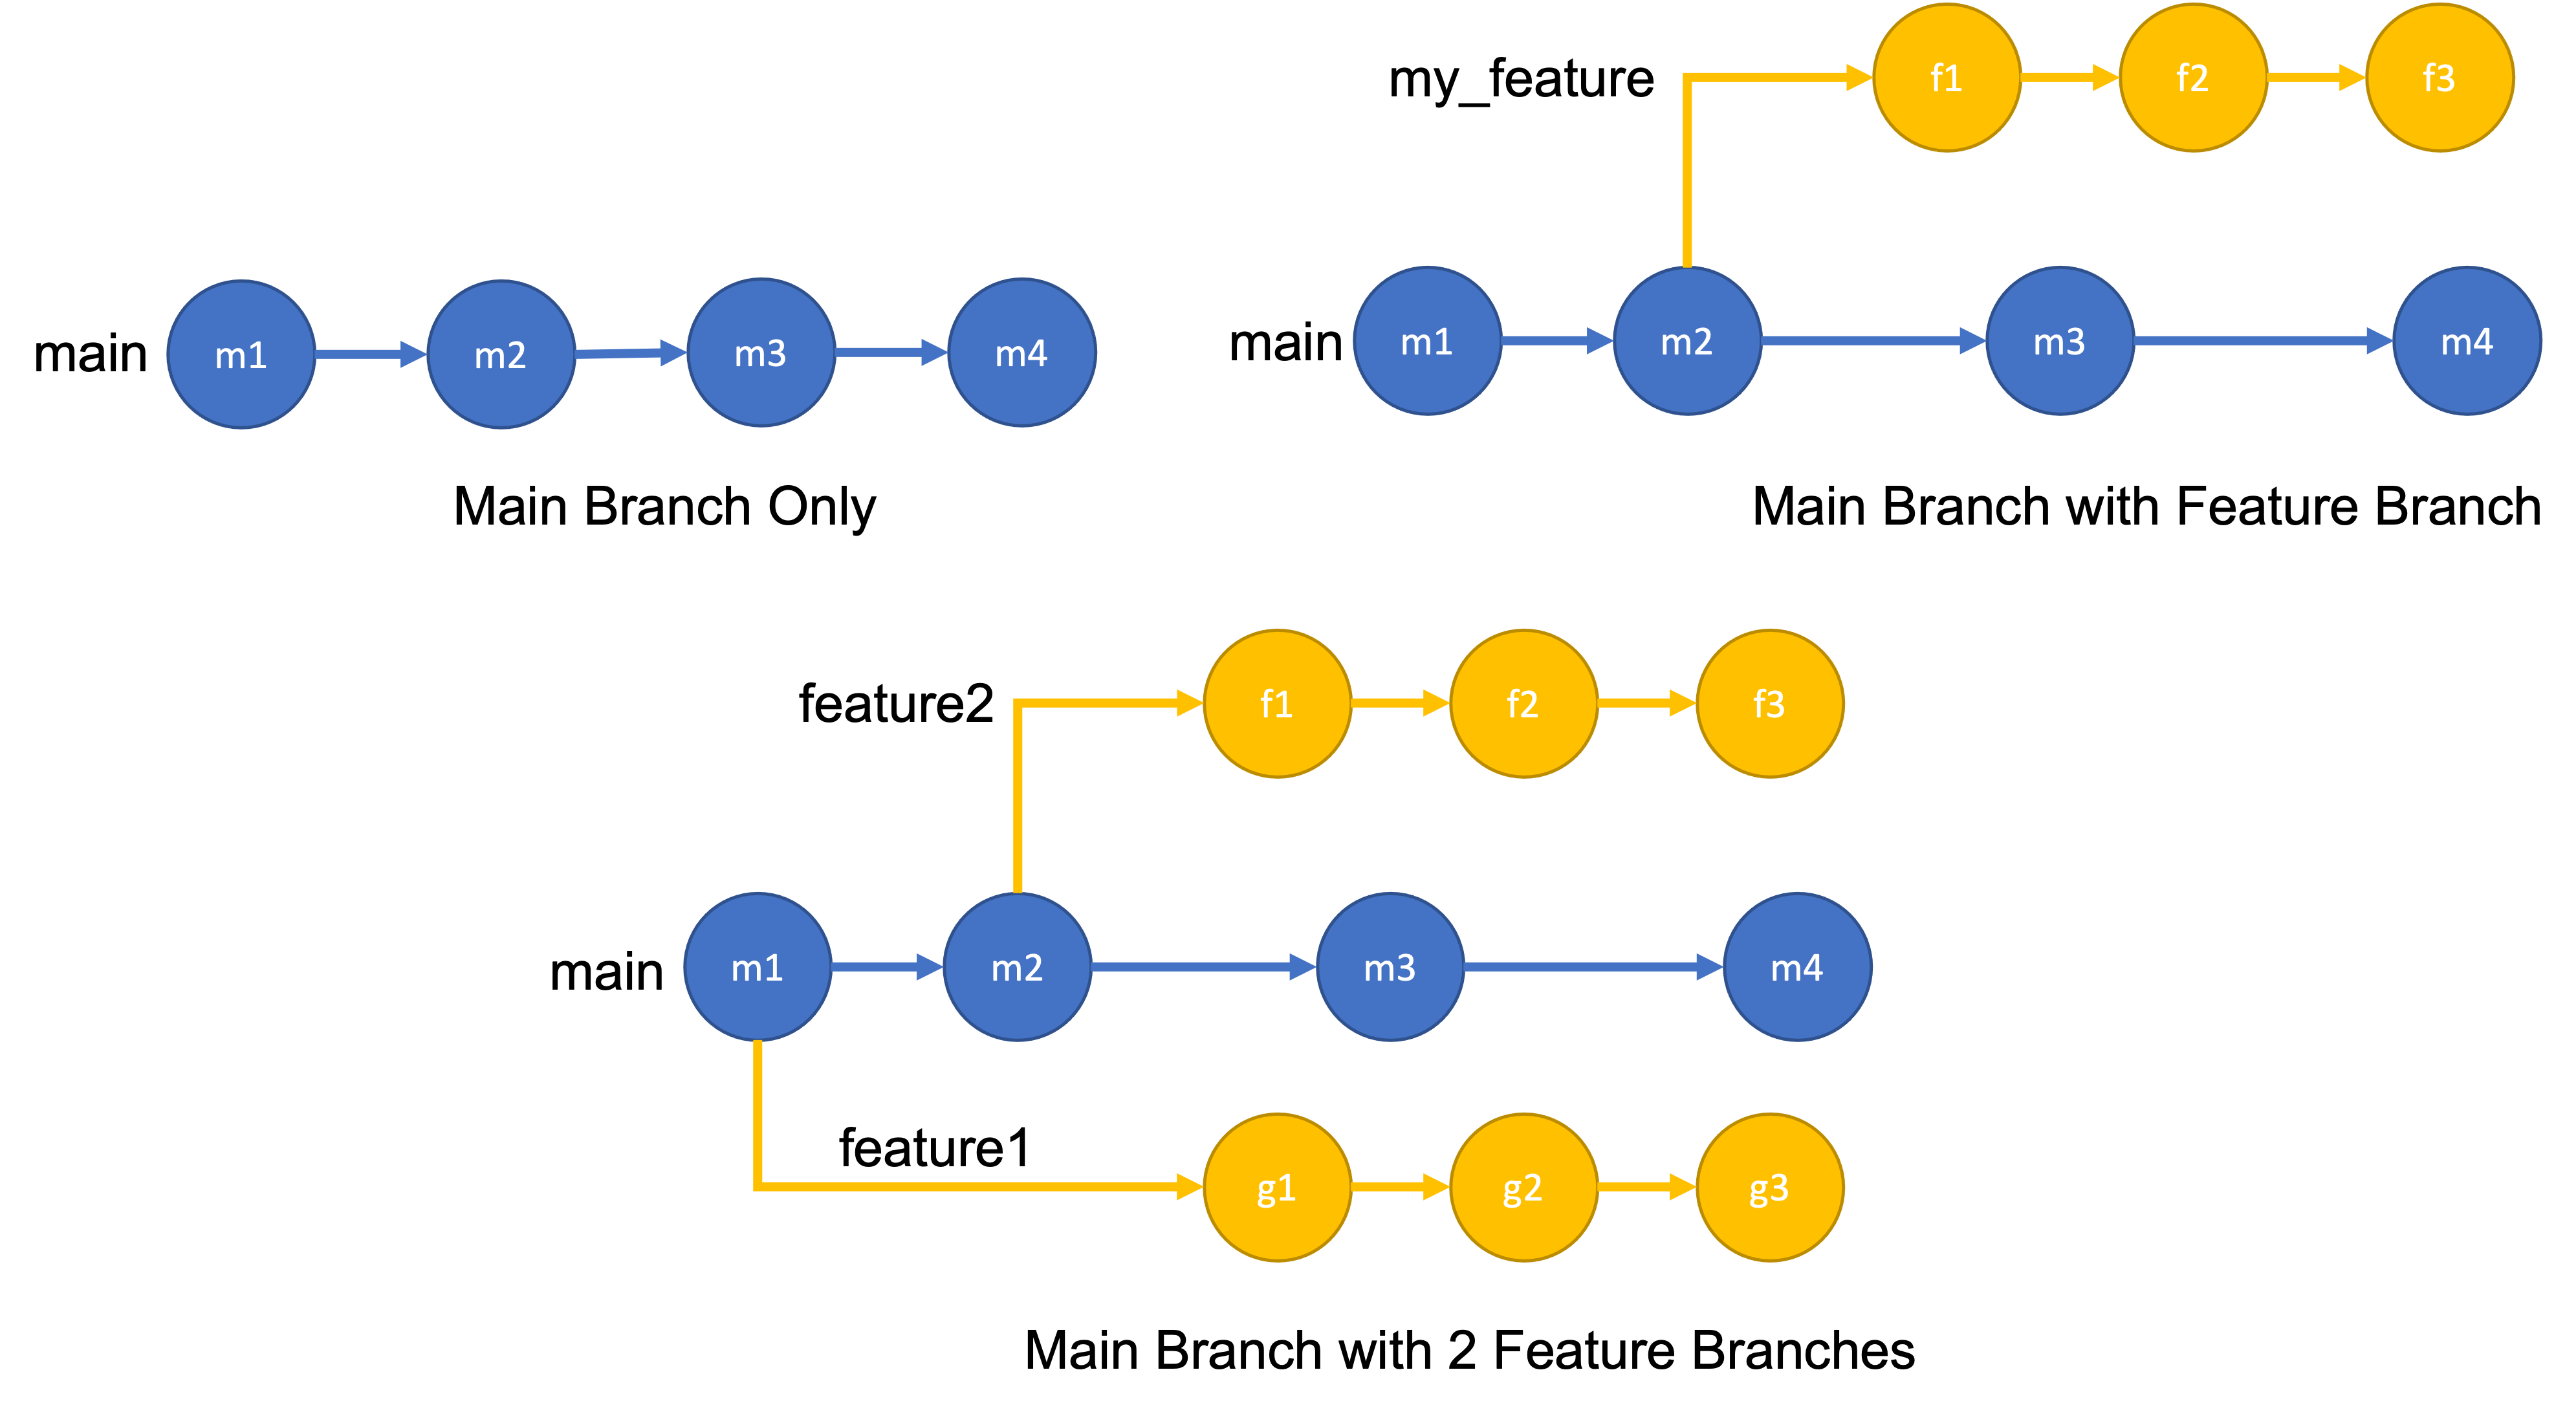 Figure showing three graph diagrams representing different repository states. Each is a graph consisting of vertices (circles) and directed edges (arrows) where each horizontal path is a branch. The first shows a single path representing a repository with a single main branch, the second has two branches, a main and a feature branch, and the third has three branches, a main and two feature branches.